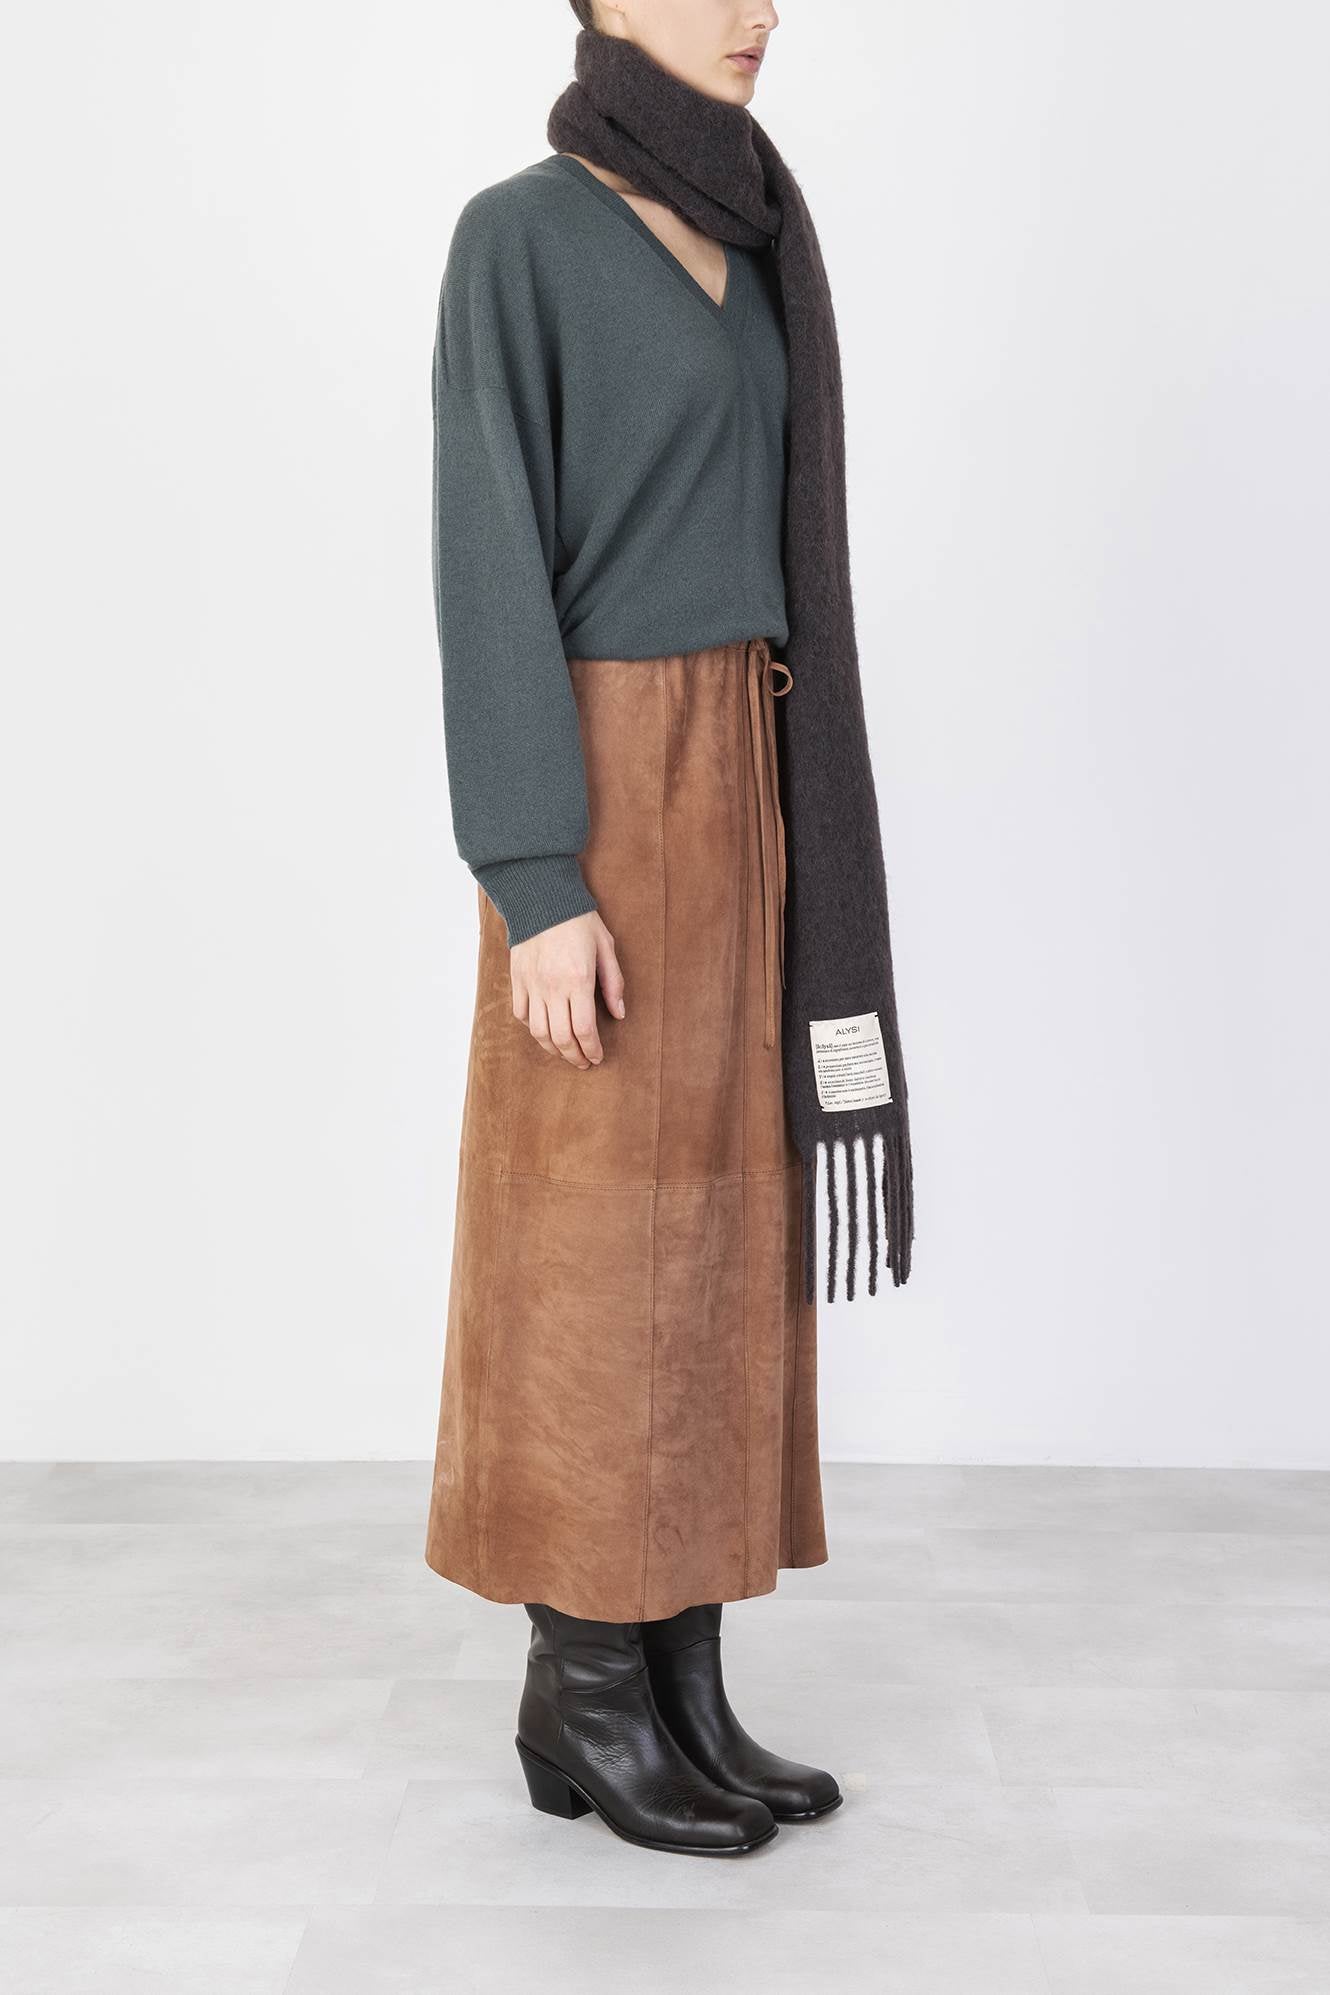 LONG SUEDE SKIRT